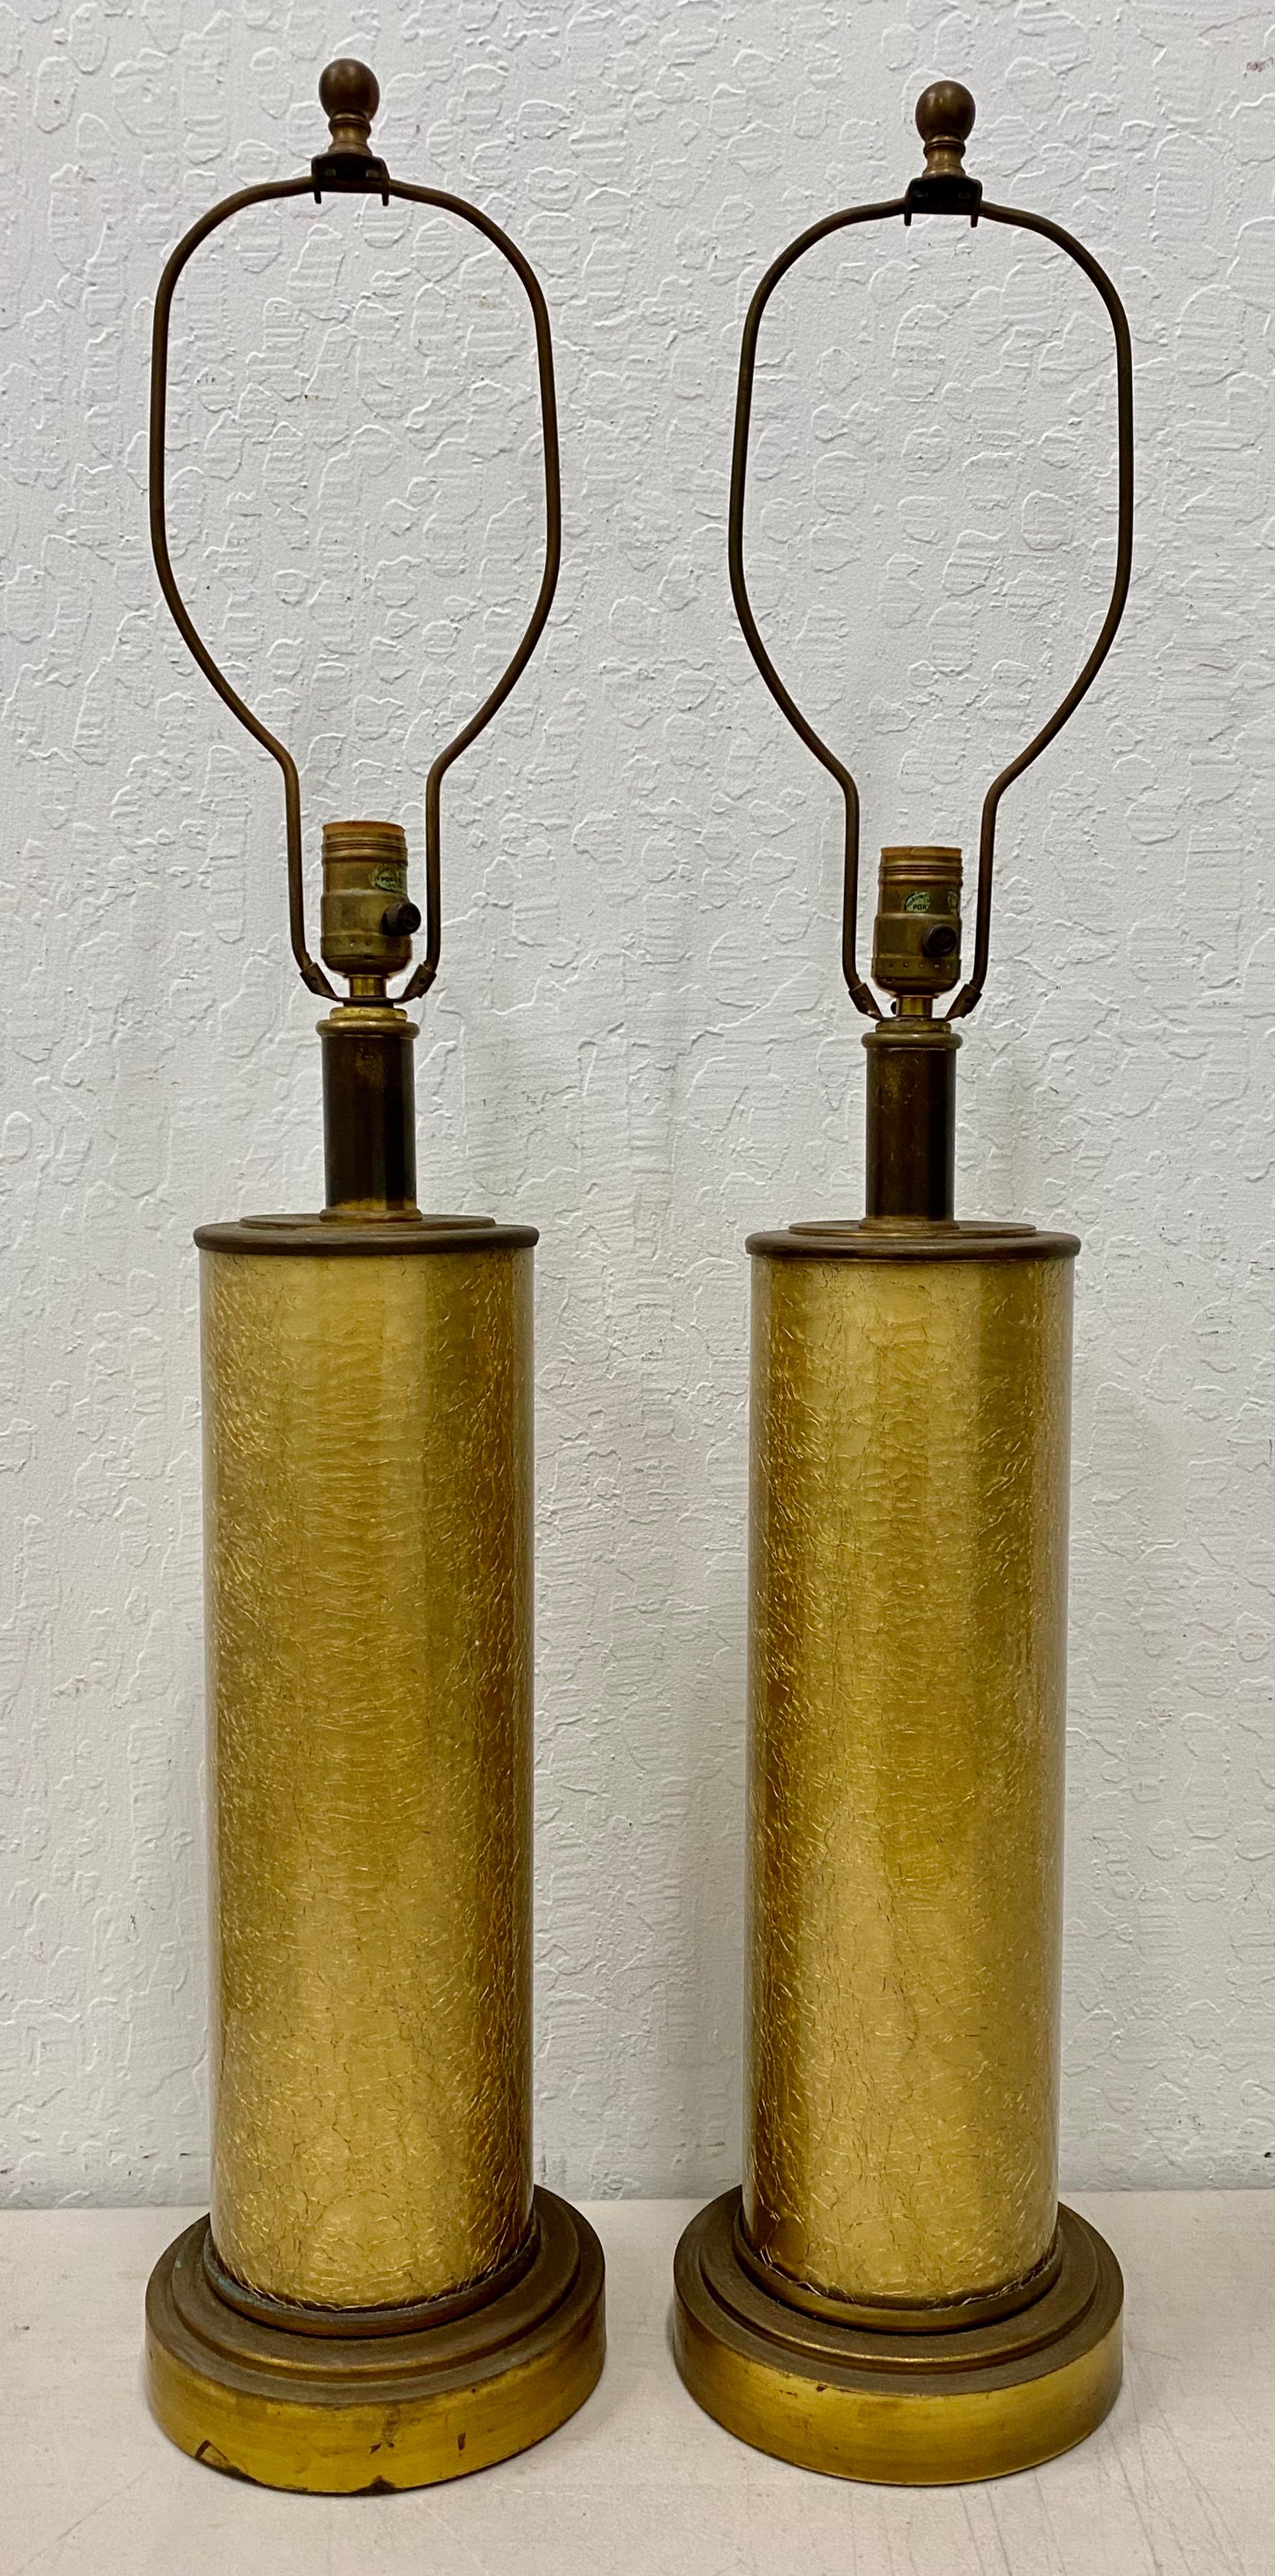 Paul Hanson Crackled (Foil) glass lamps with original shades, circa 1950

Absolutely stunning pair of original Paul Hanson cylindrical glass lamps with crackled gold foil.

Each lamp measures 7